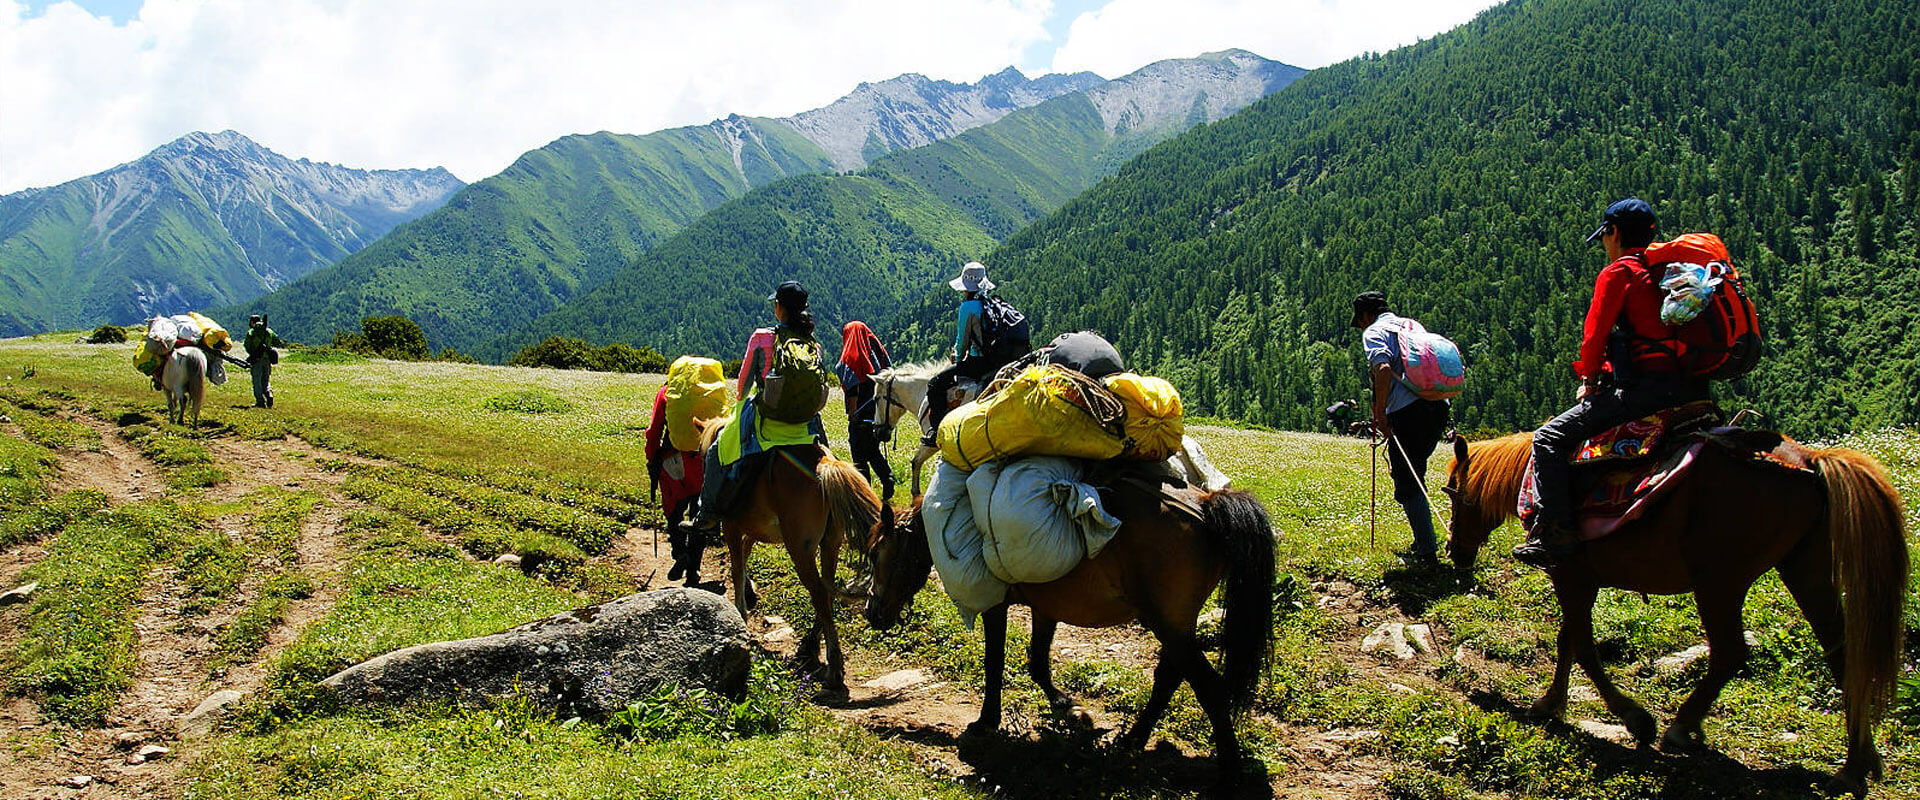 Sichuan Self Guided Tours